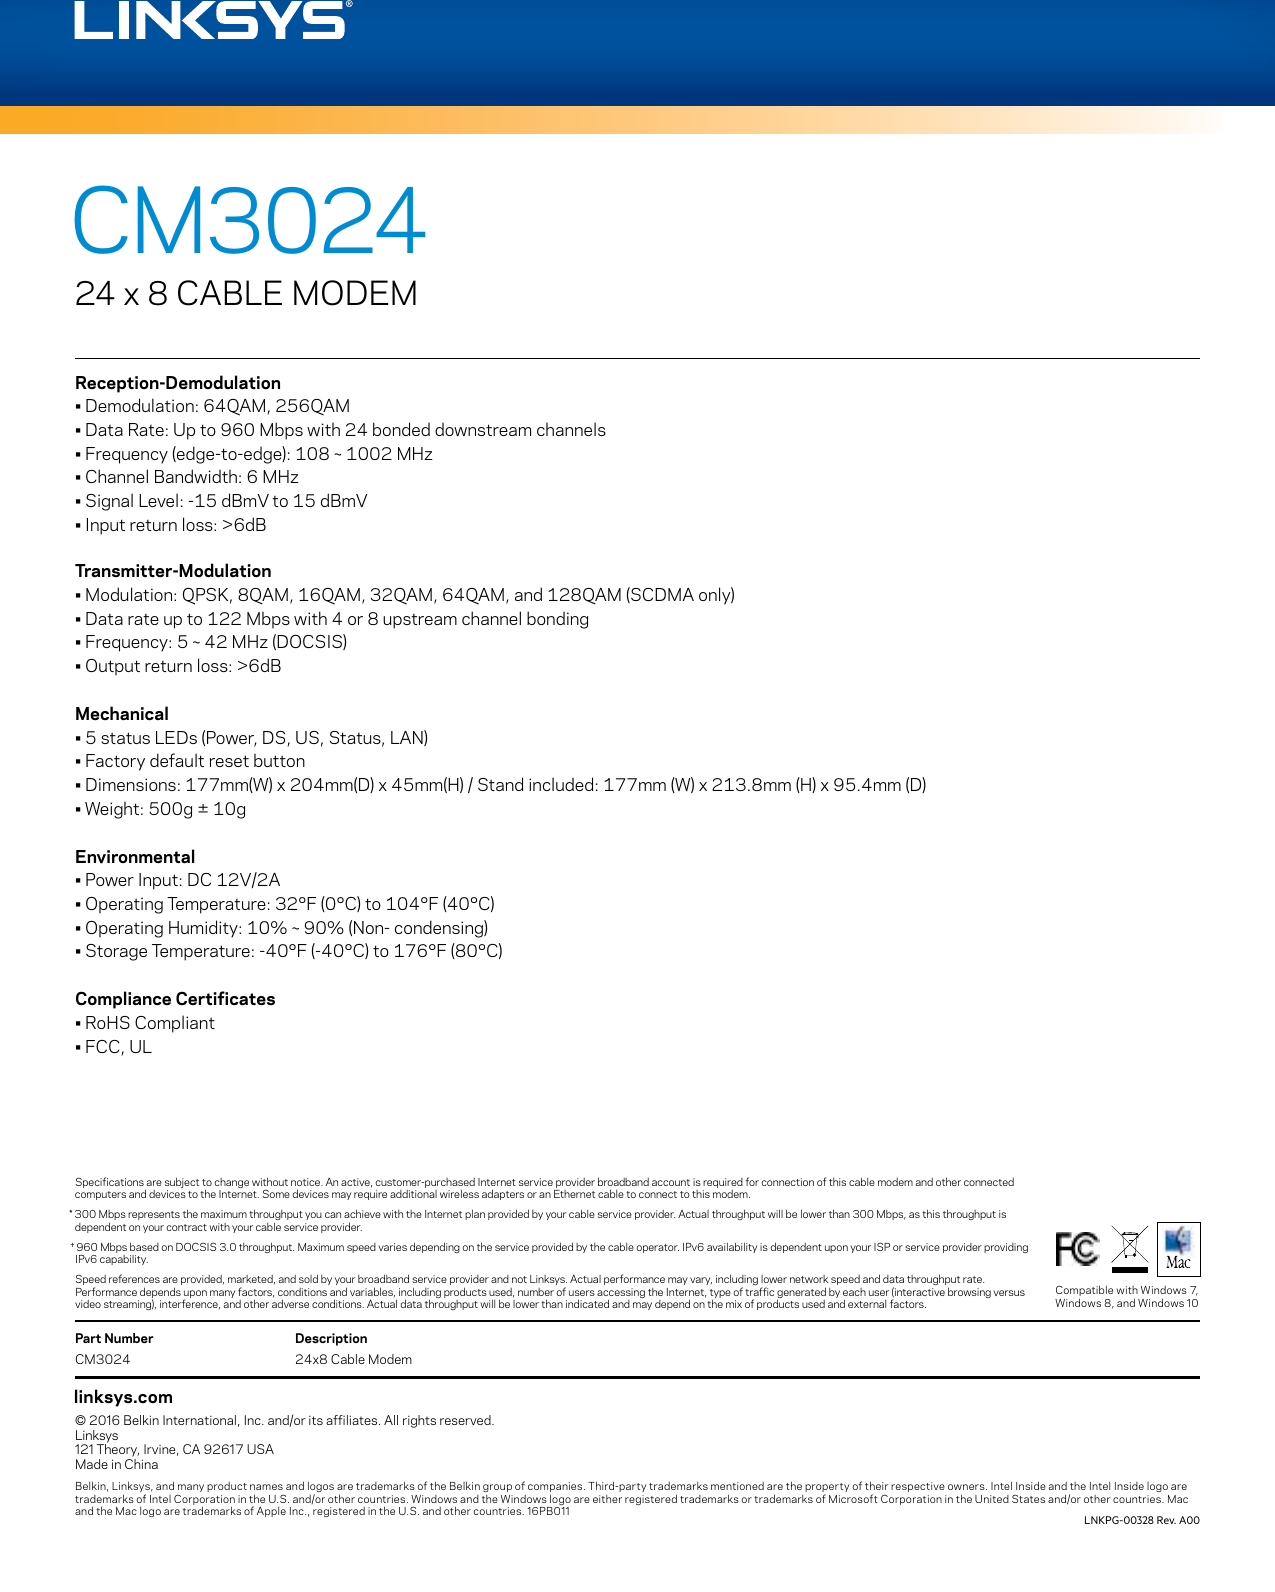 Page 3 of 3 - Datasheet - Linksys CM3024 24x8 Cable Modem  DS DOCSIS 3.0 LNKPG-00328 Rev. A00